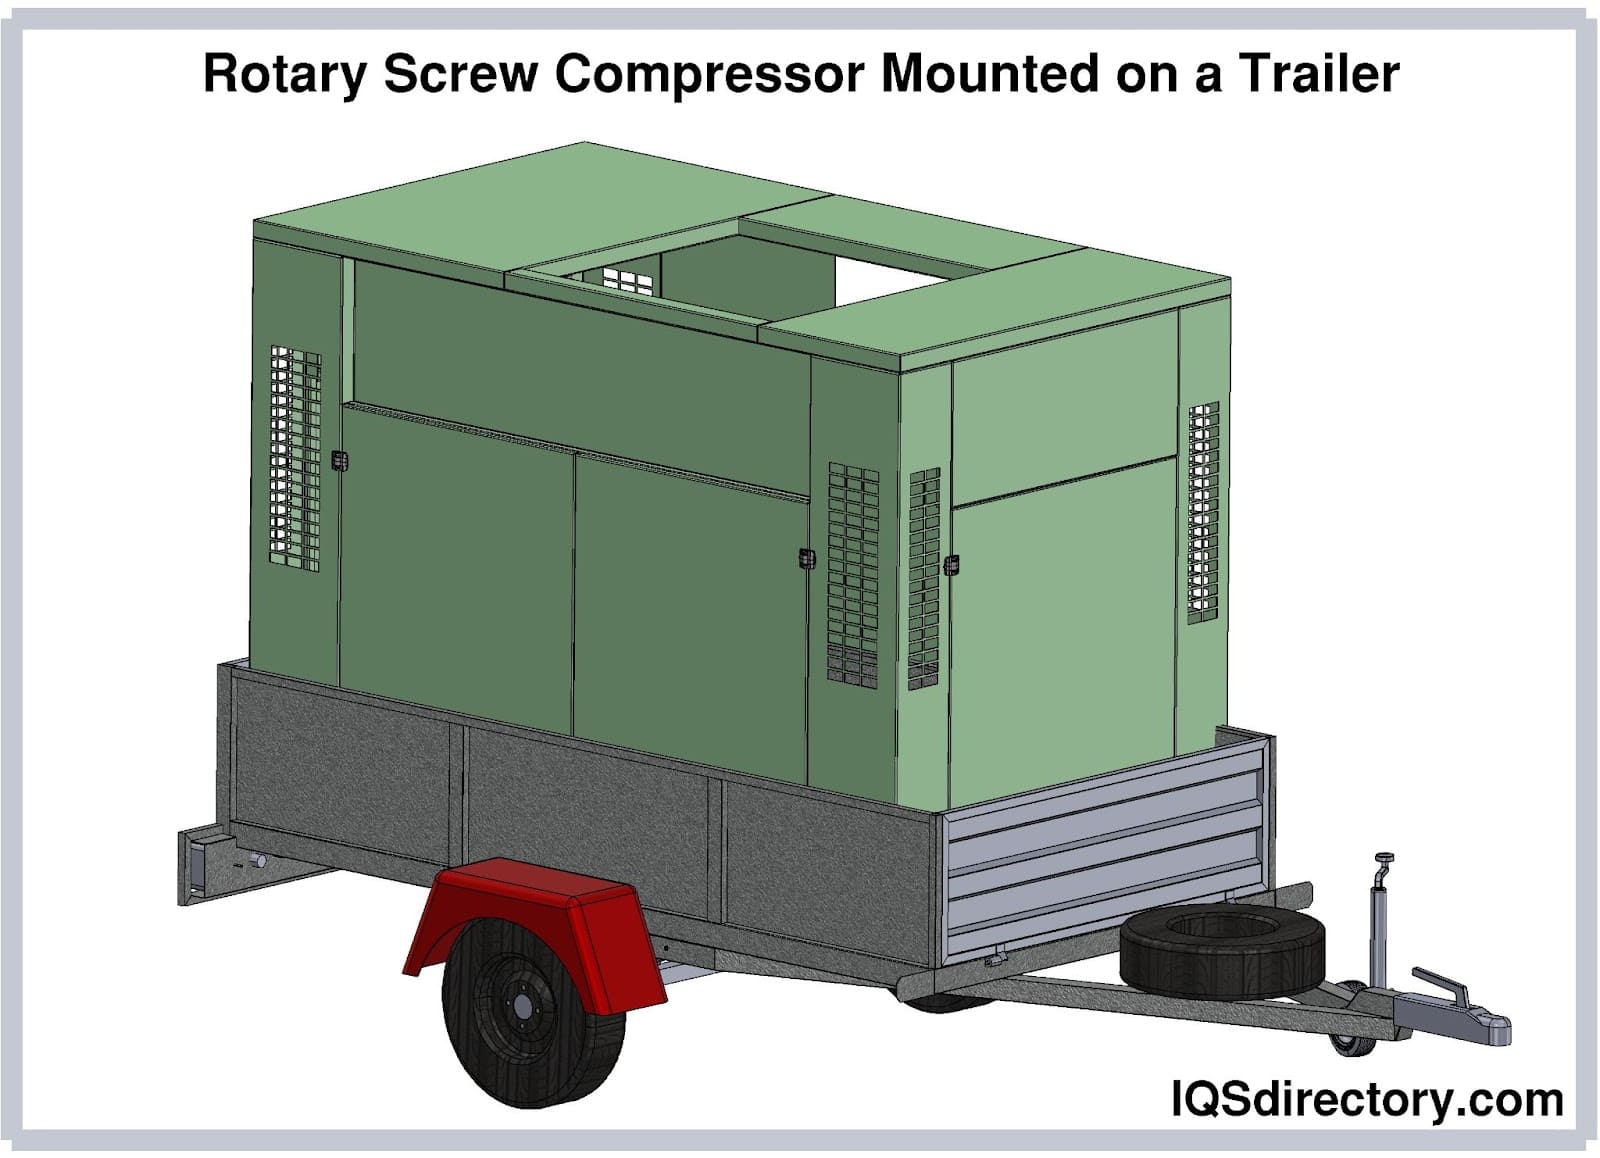 Rotary Screw Compressor Mounted on a Trailer